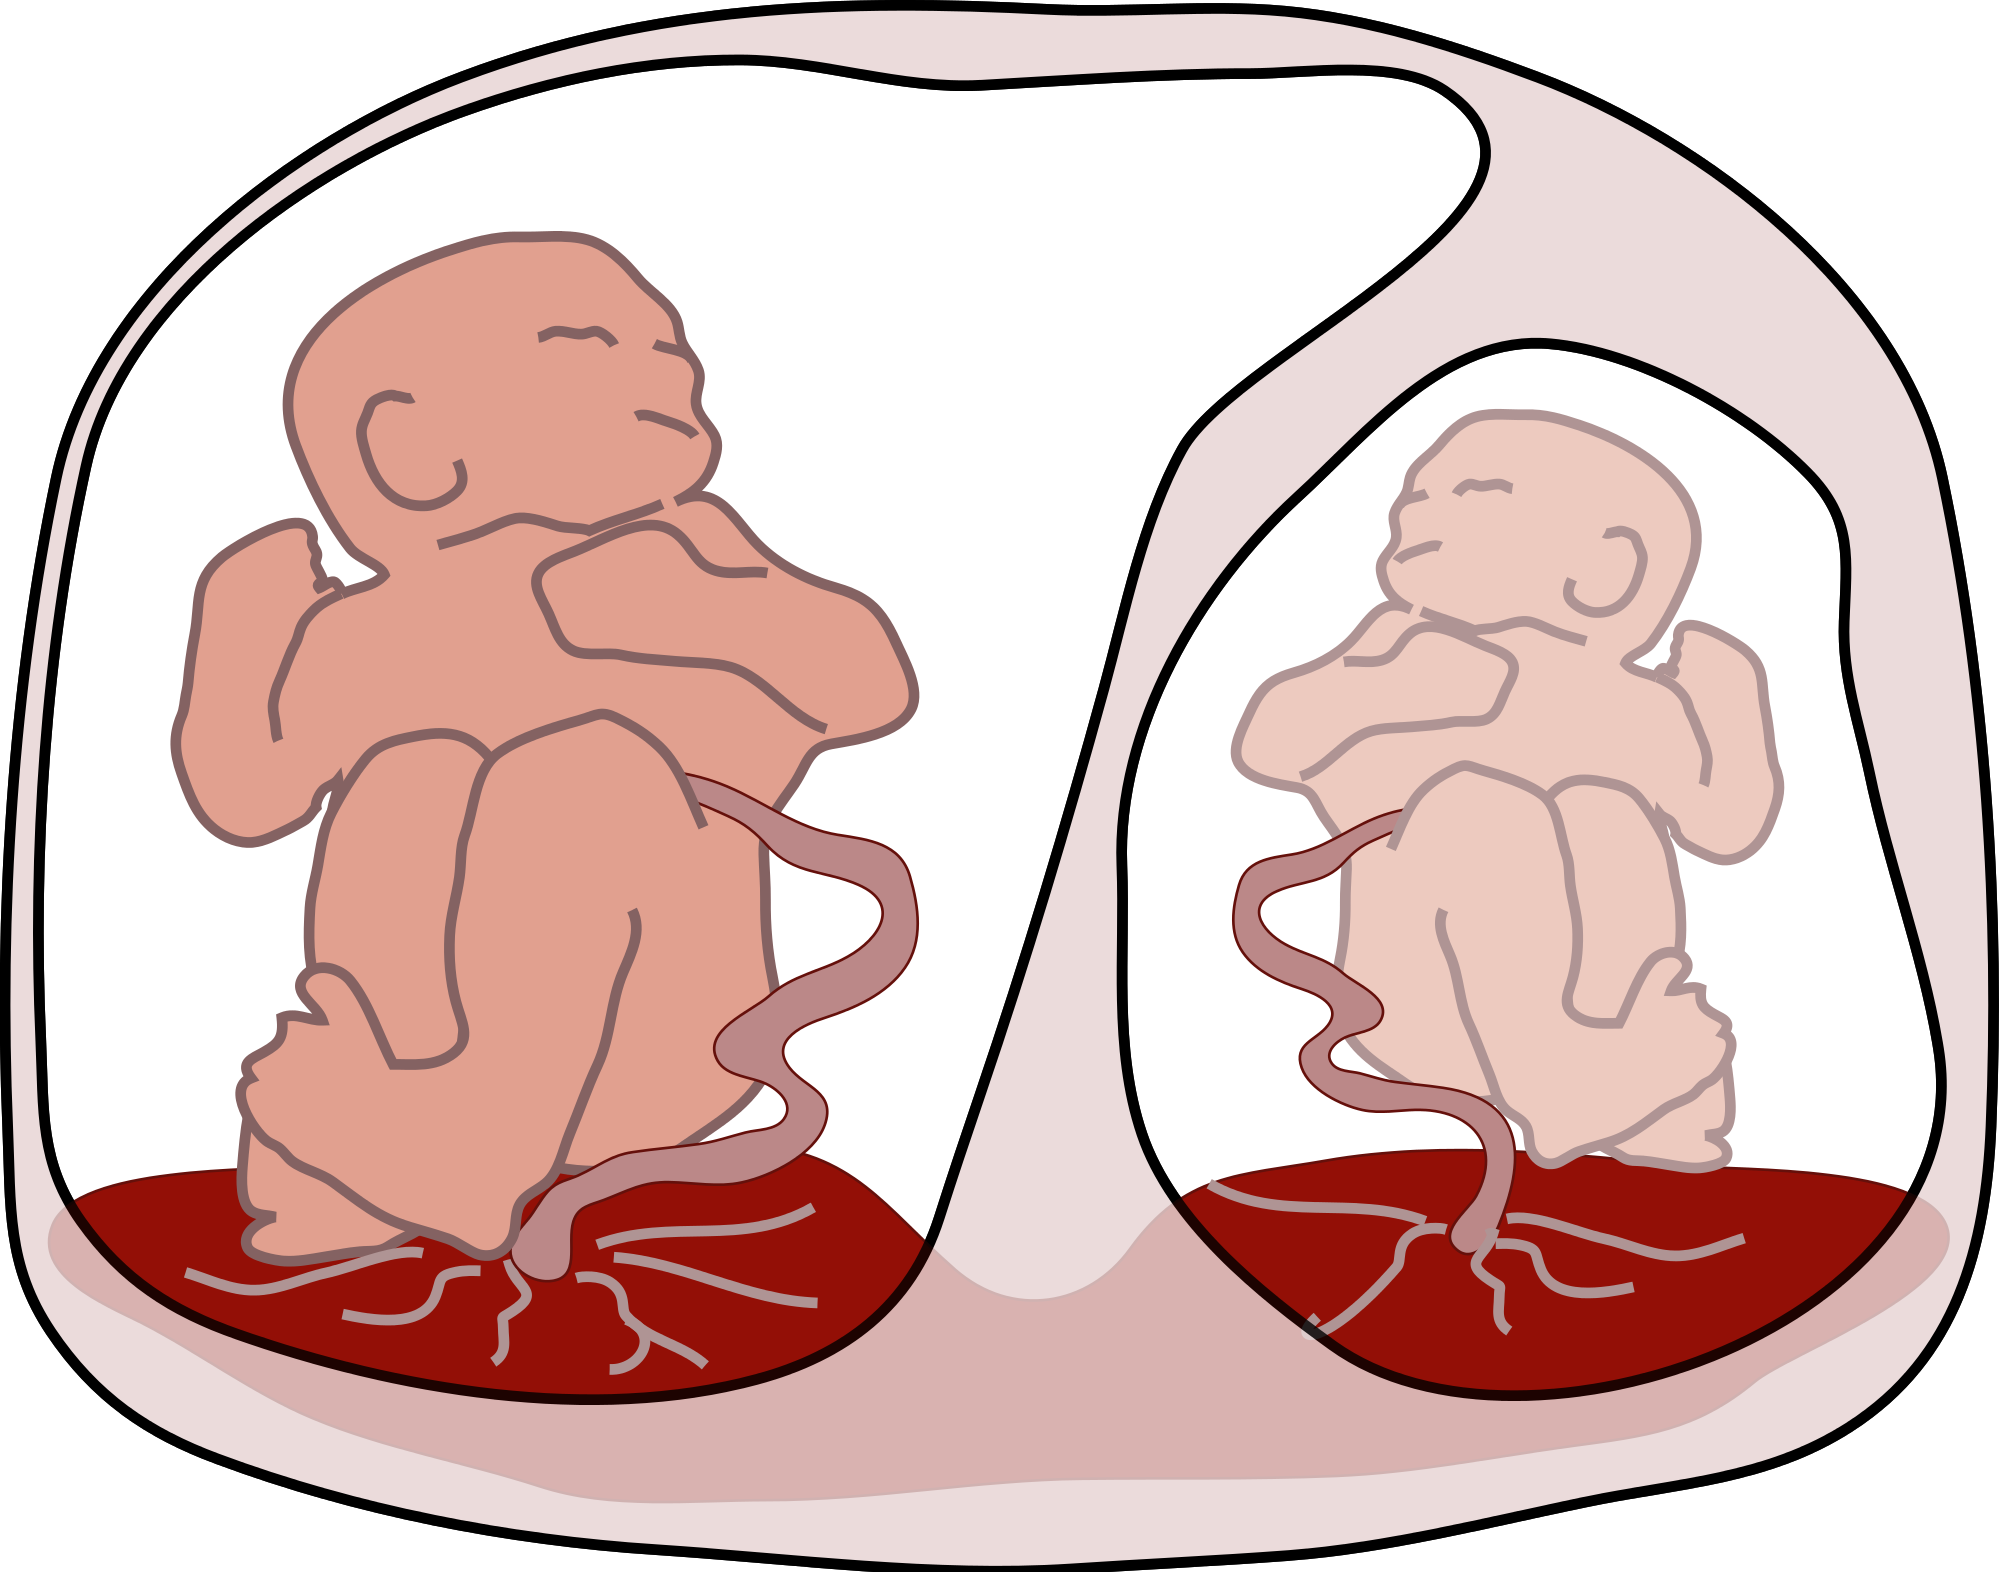 Twins clipart identical, Twins identical Transparent FREE.